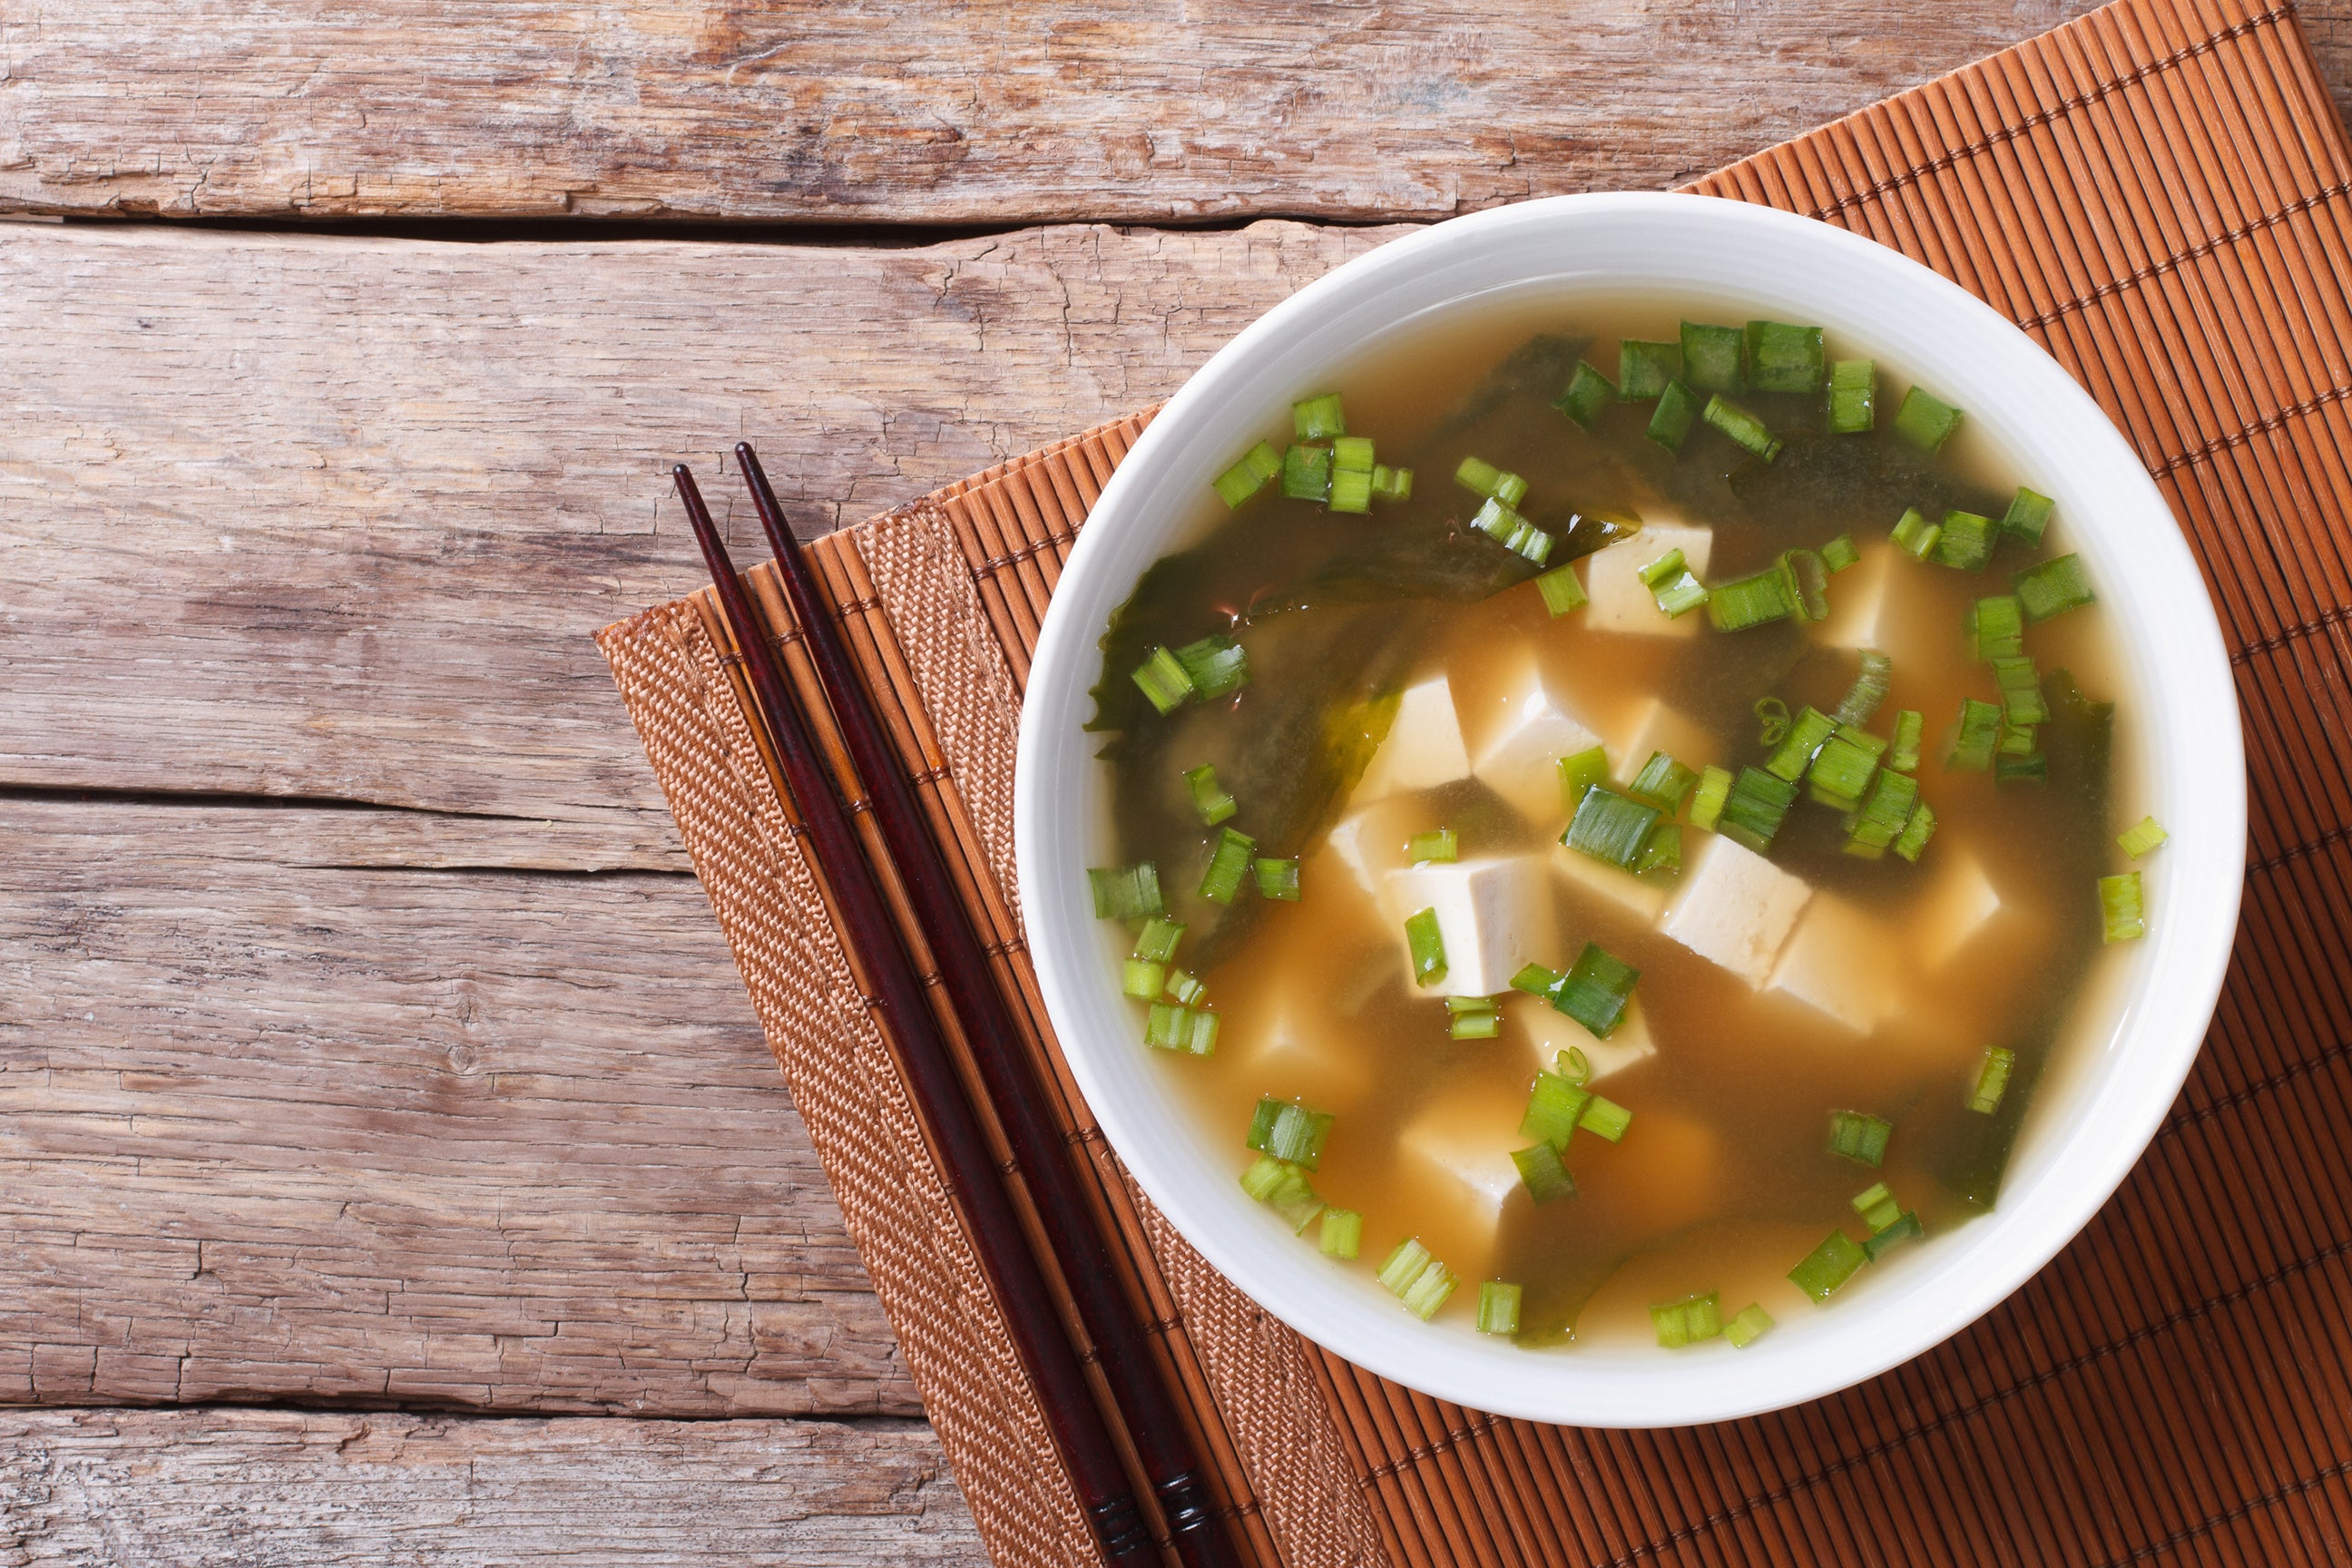 Japanese Miso Soup is made with miso paste, tofu, and seaweed, flavored with ginger and green onions.